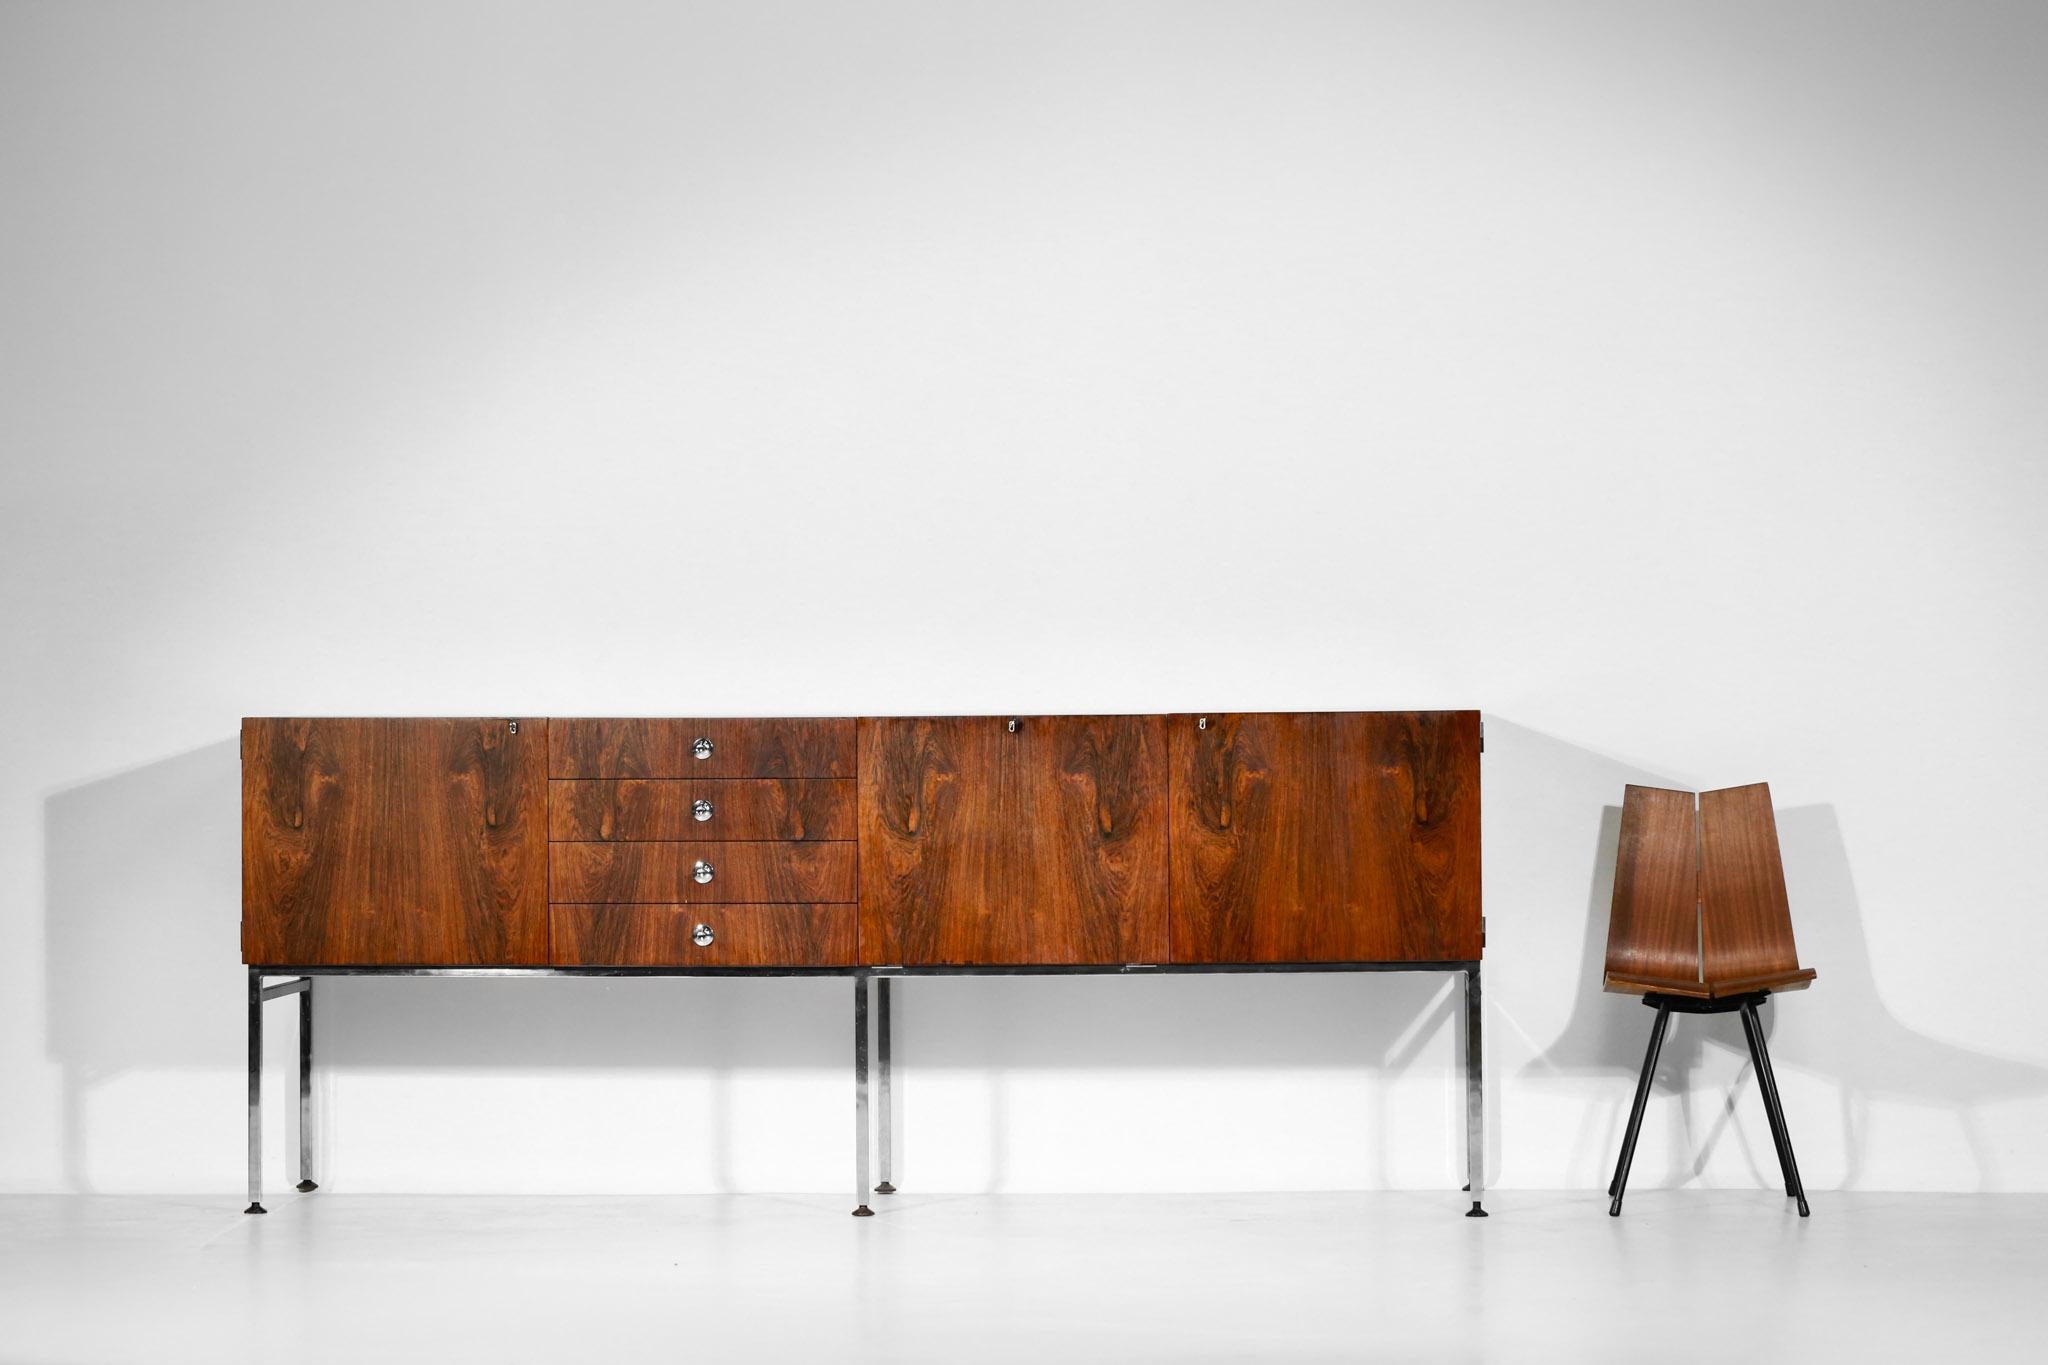 Great Alain Richard Large Sideboard of 1960s for Meuble TV French Design 1960 For Sale 4